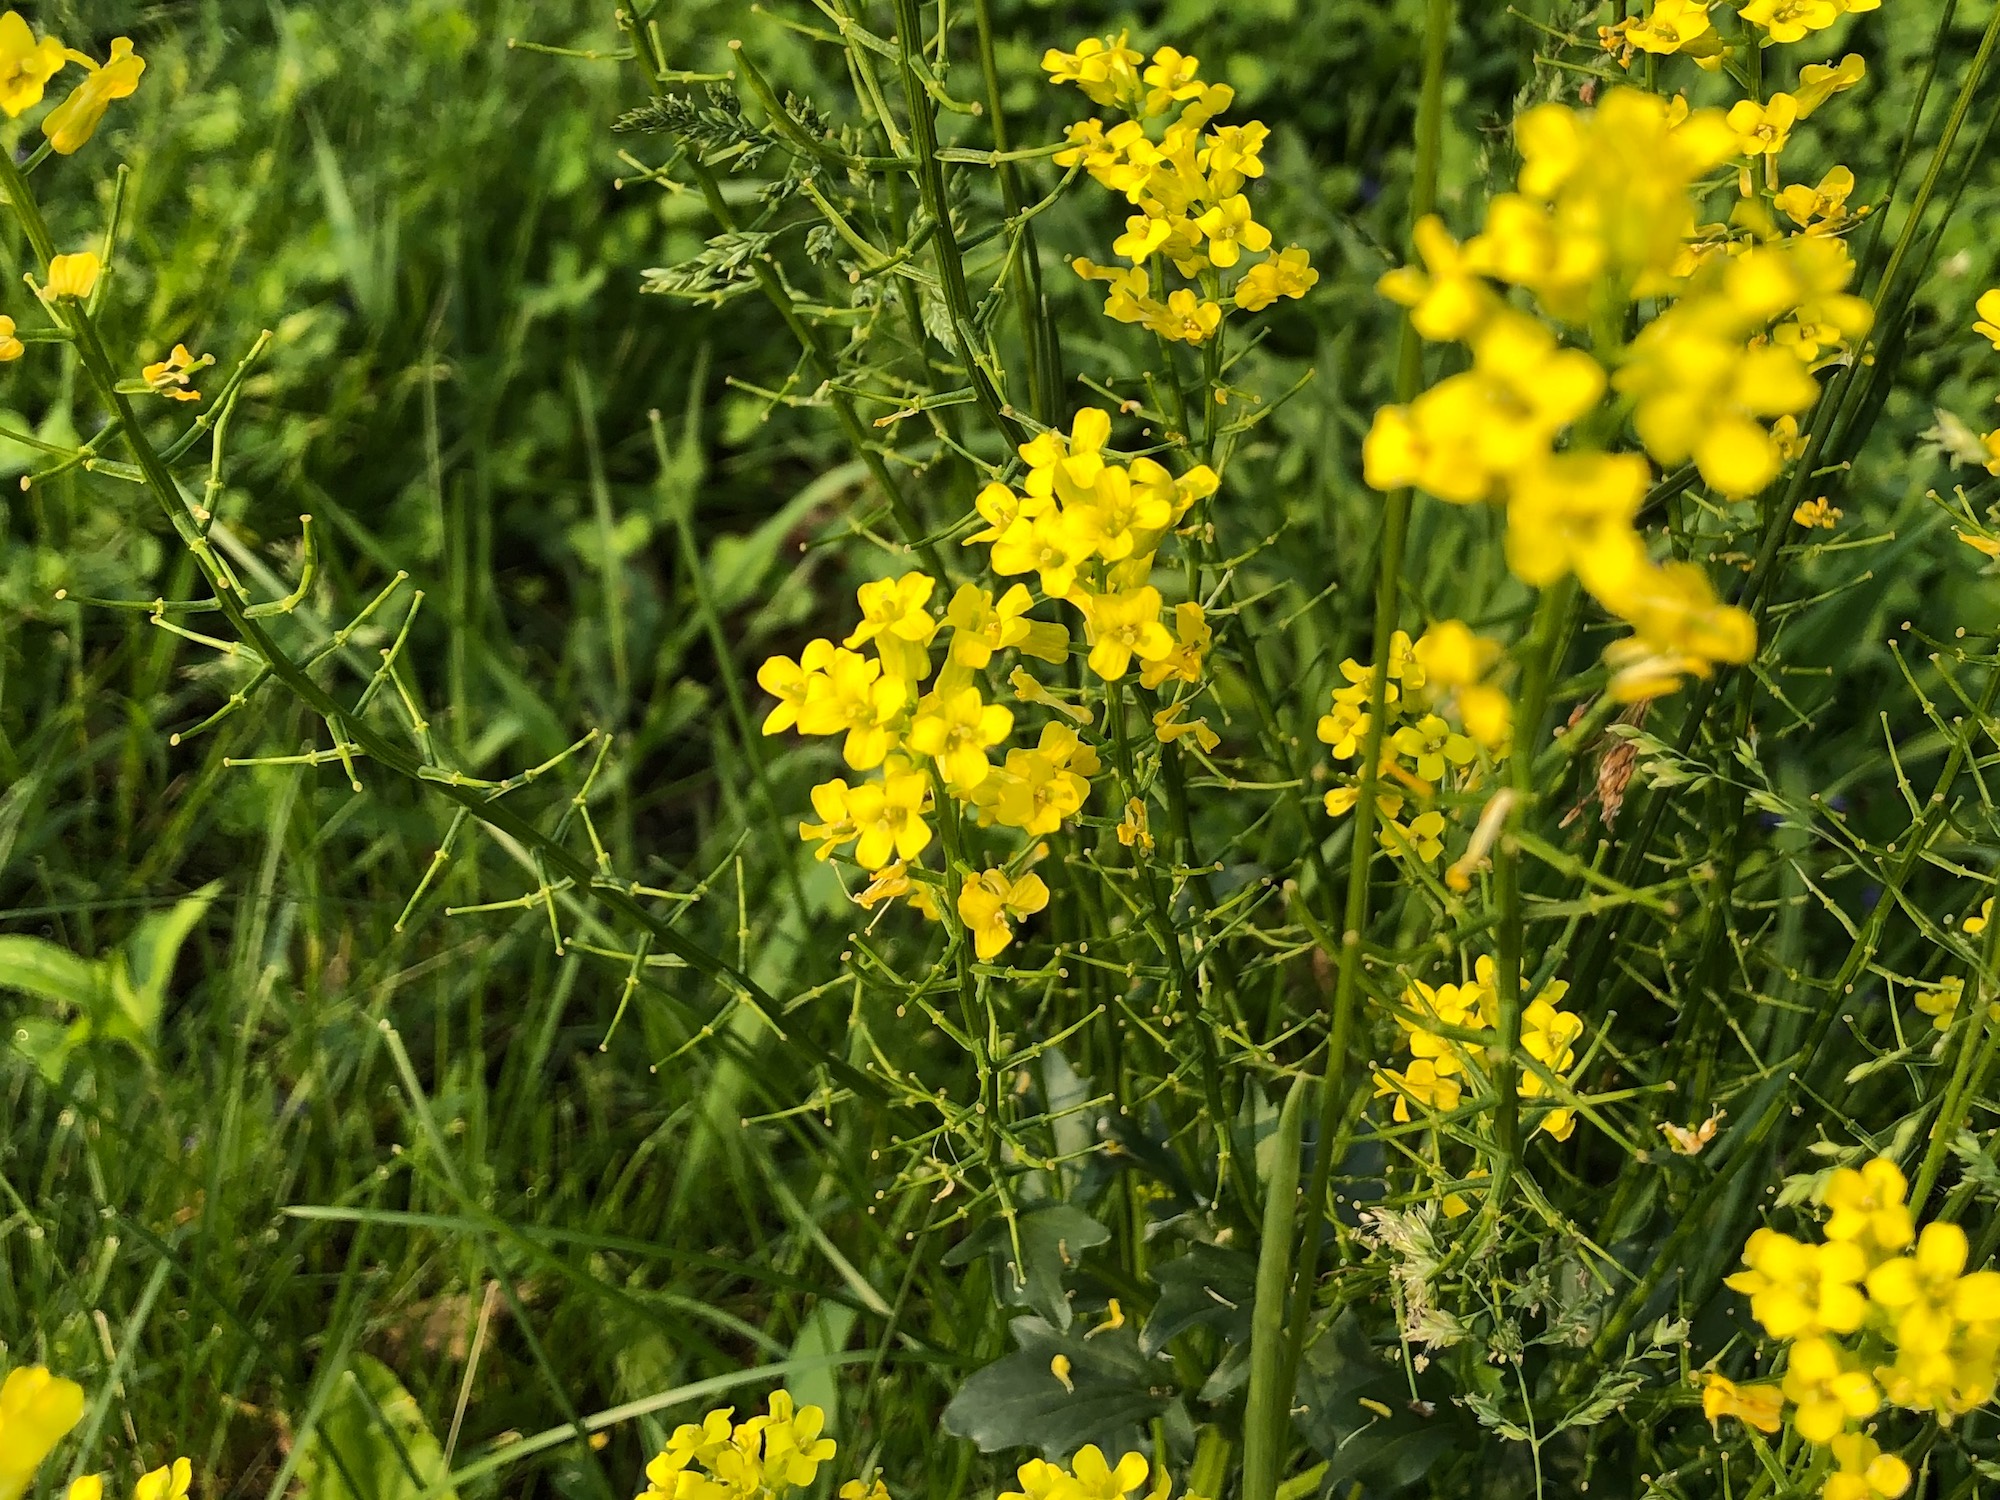 Garden Yellow Rocket by Marion Dunn Pond on May 31, 2019.